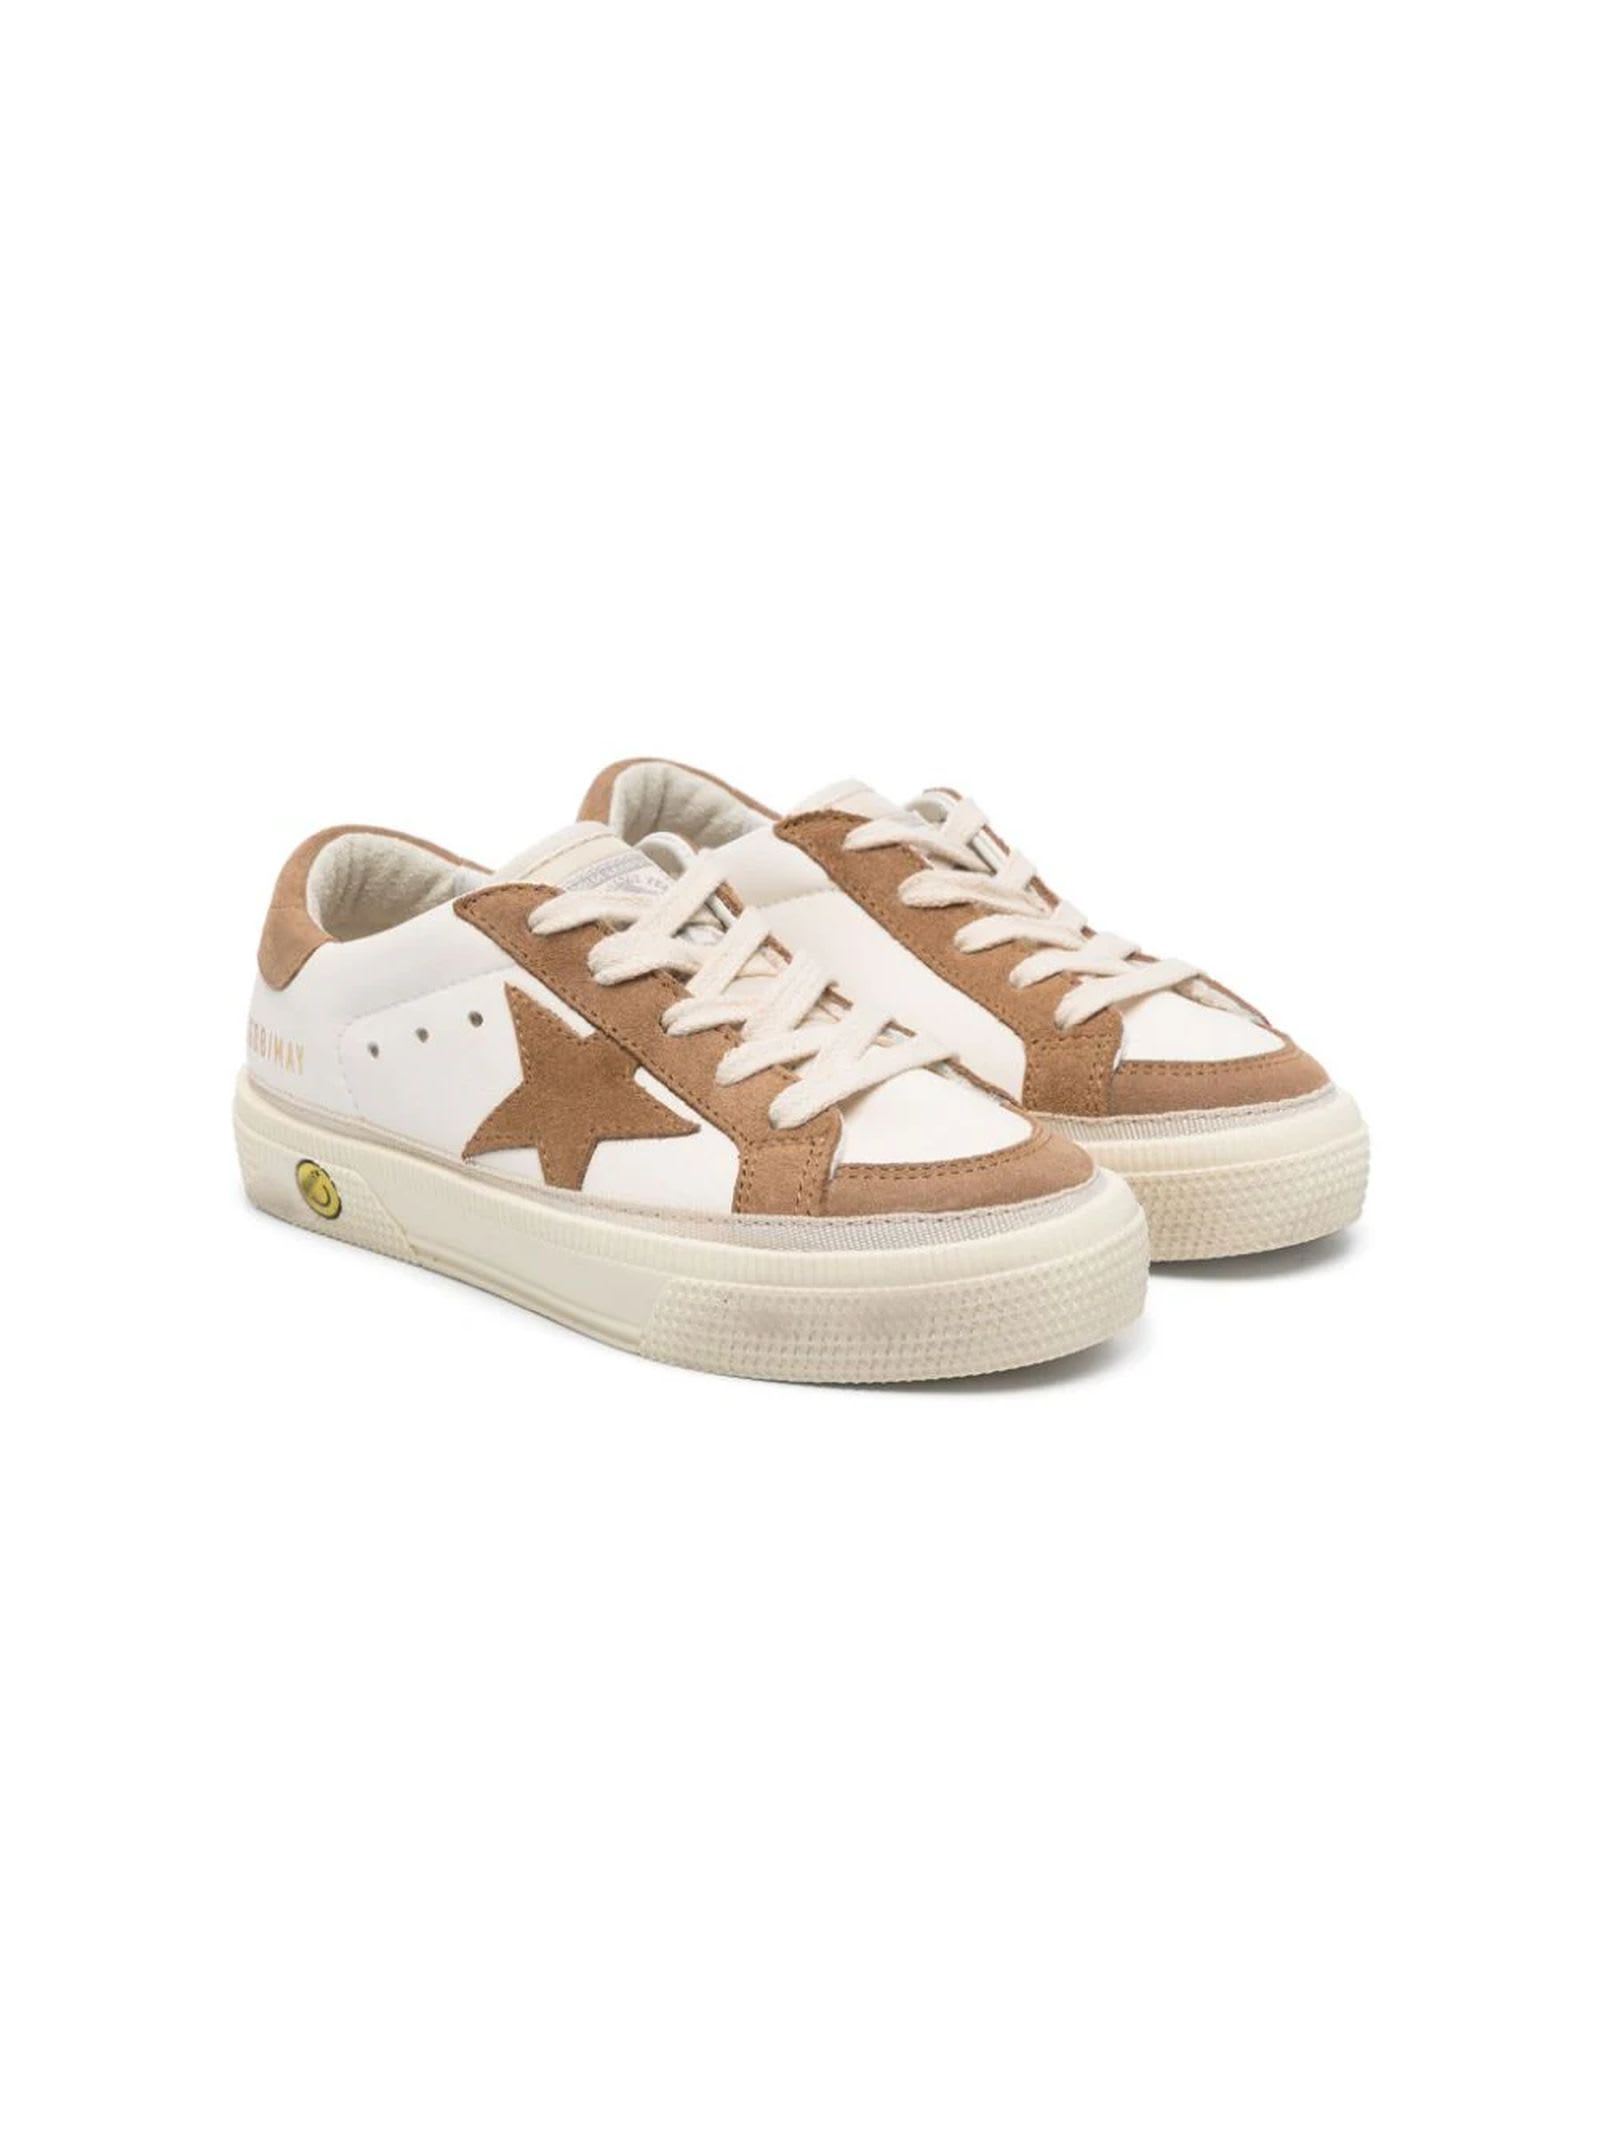 GOLDEN GOOSE BROWN LEATHER SNEAKERS